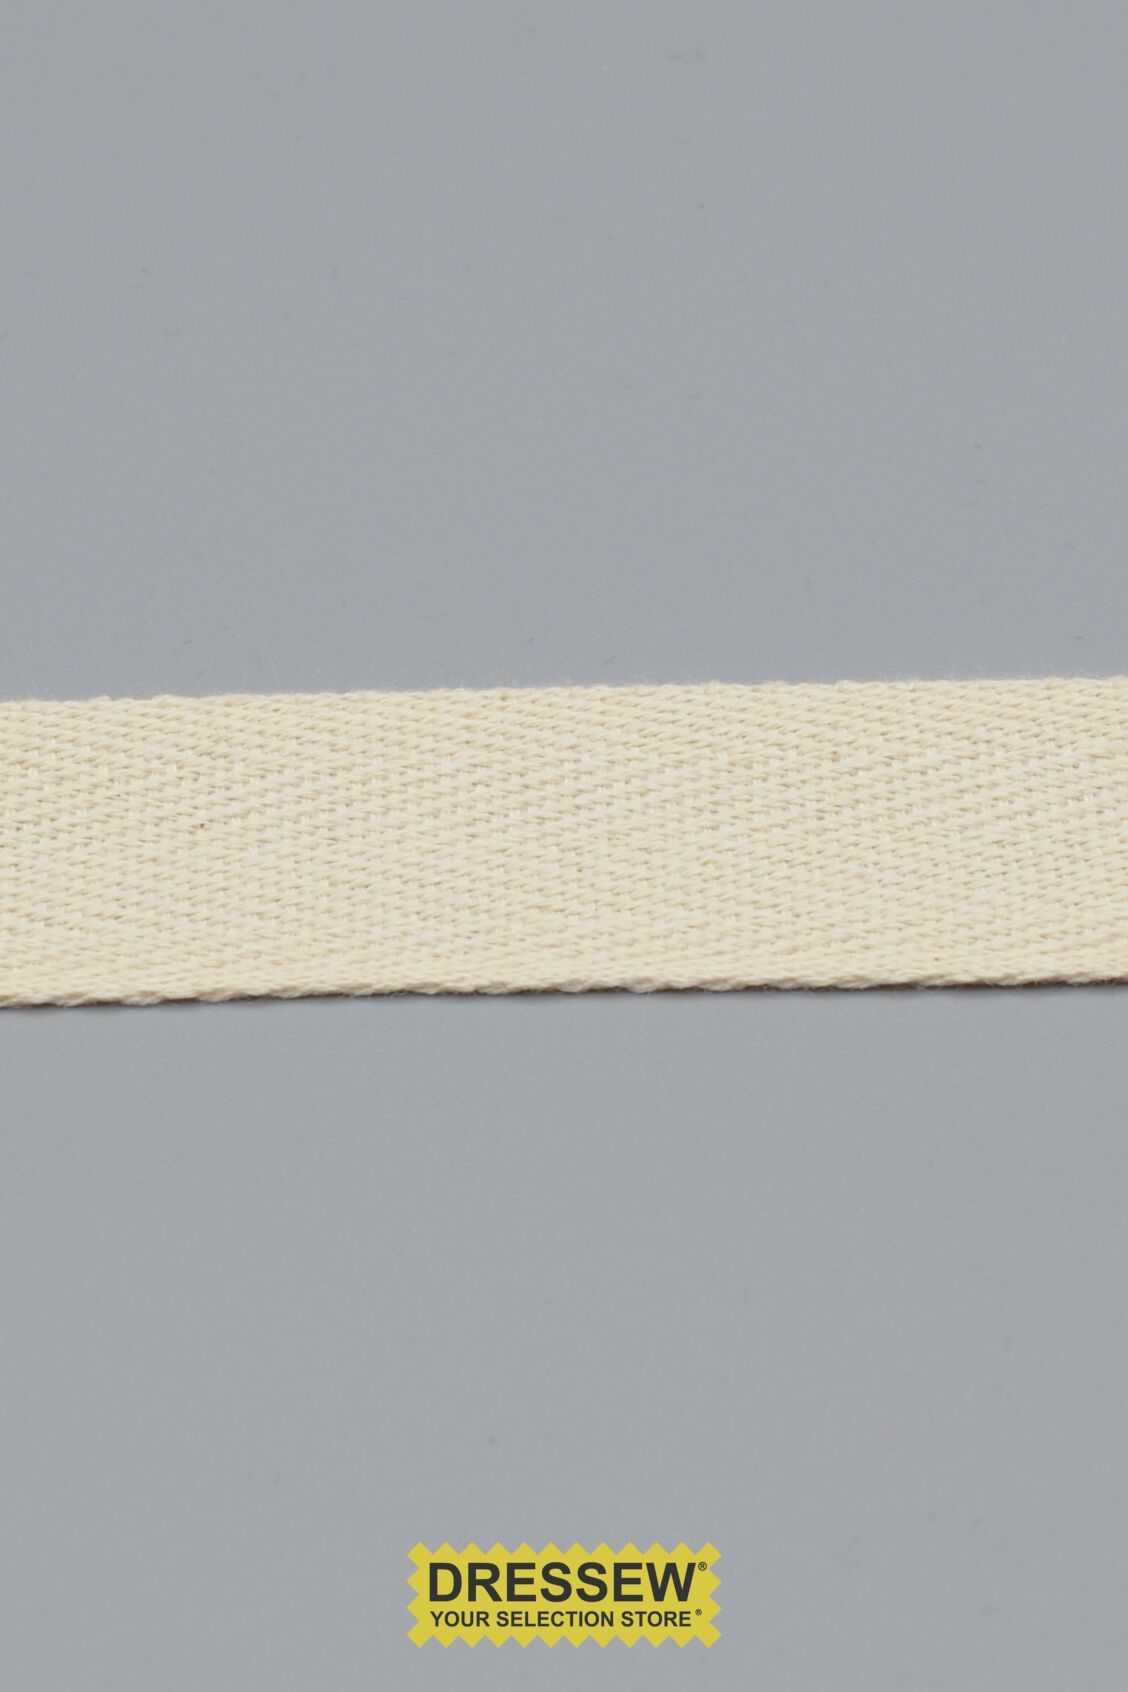 Cotton Twill Tape 25mm (1") Natural